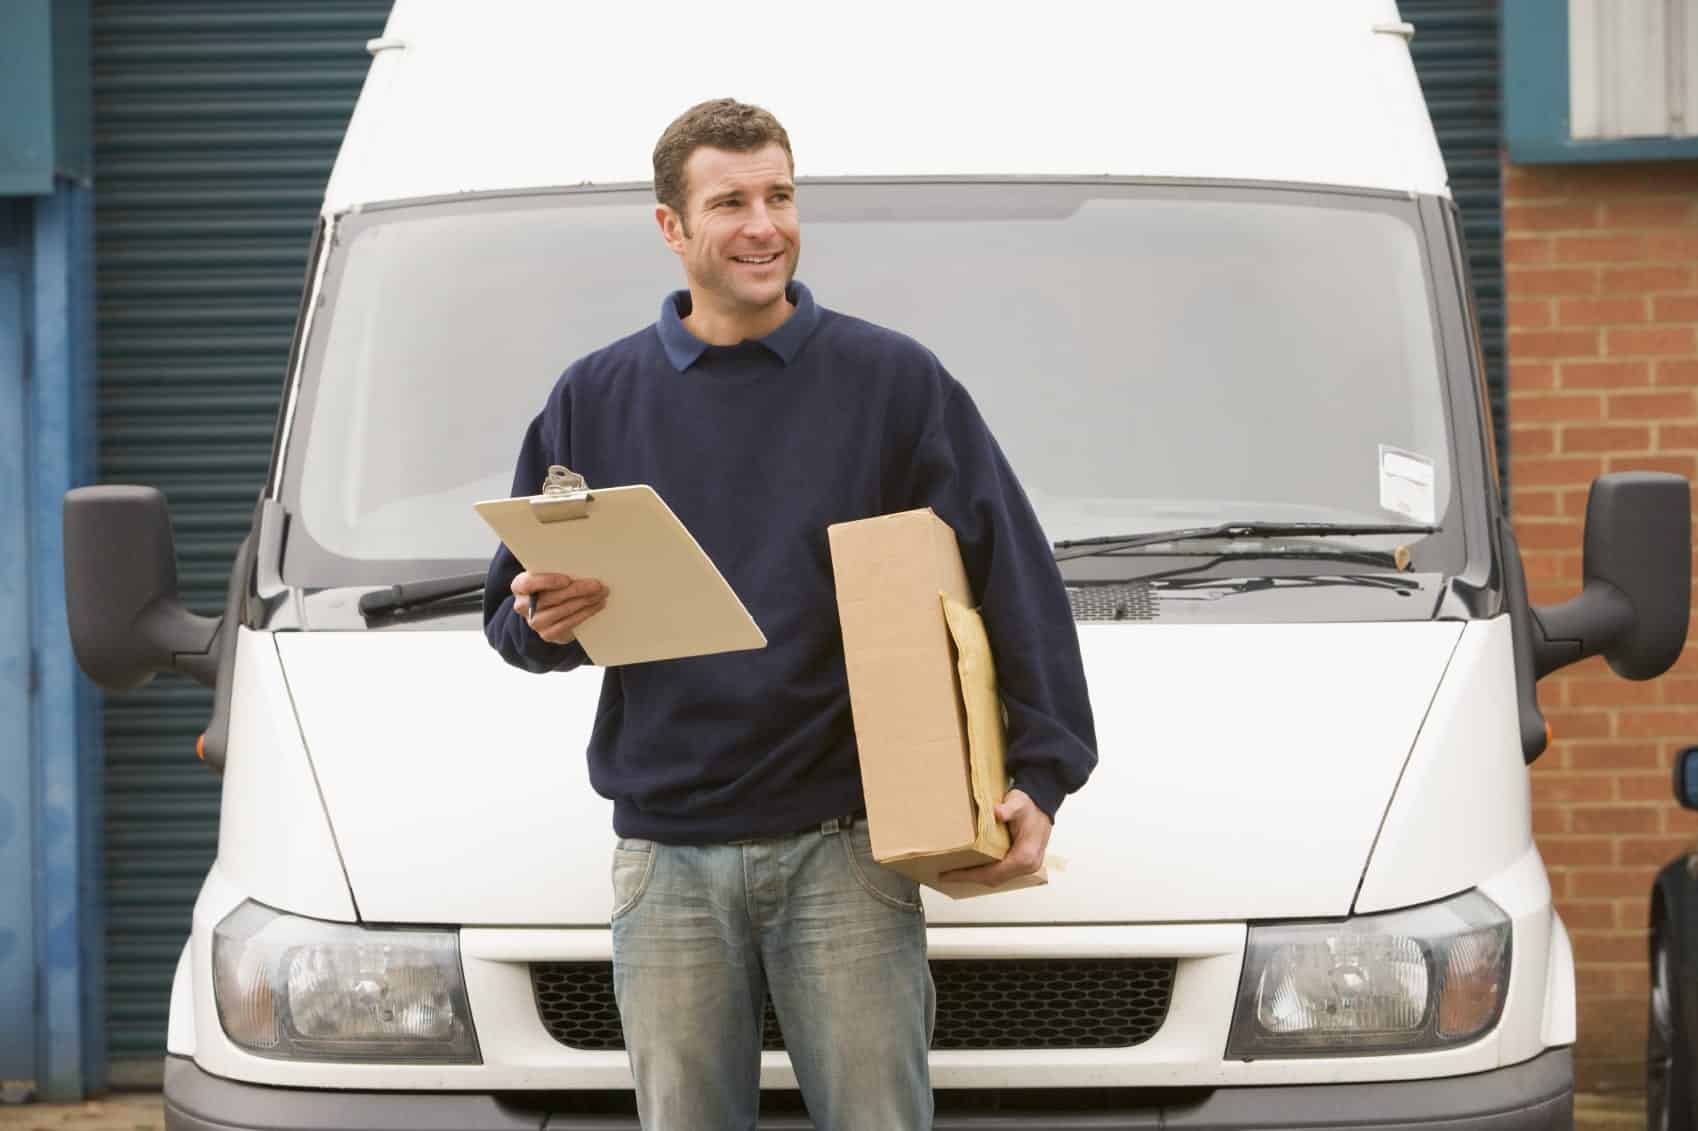 5 Things to Consider When Hiring a Delivery Driver